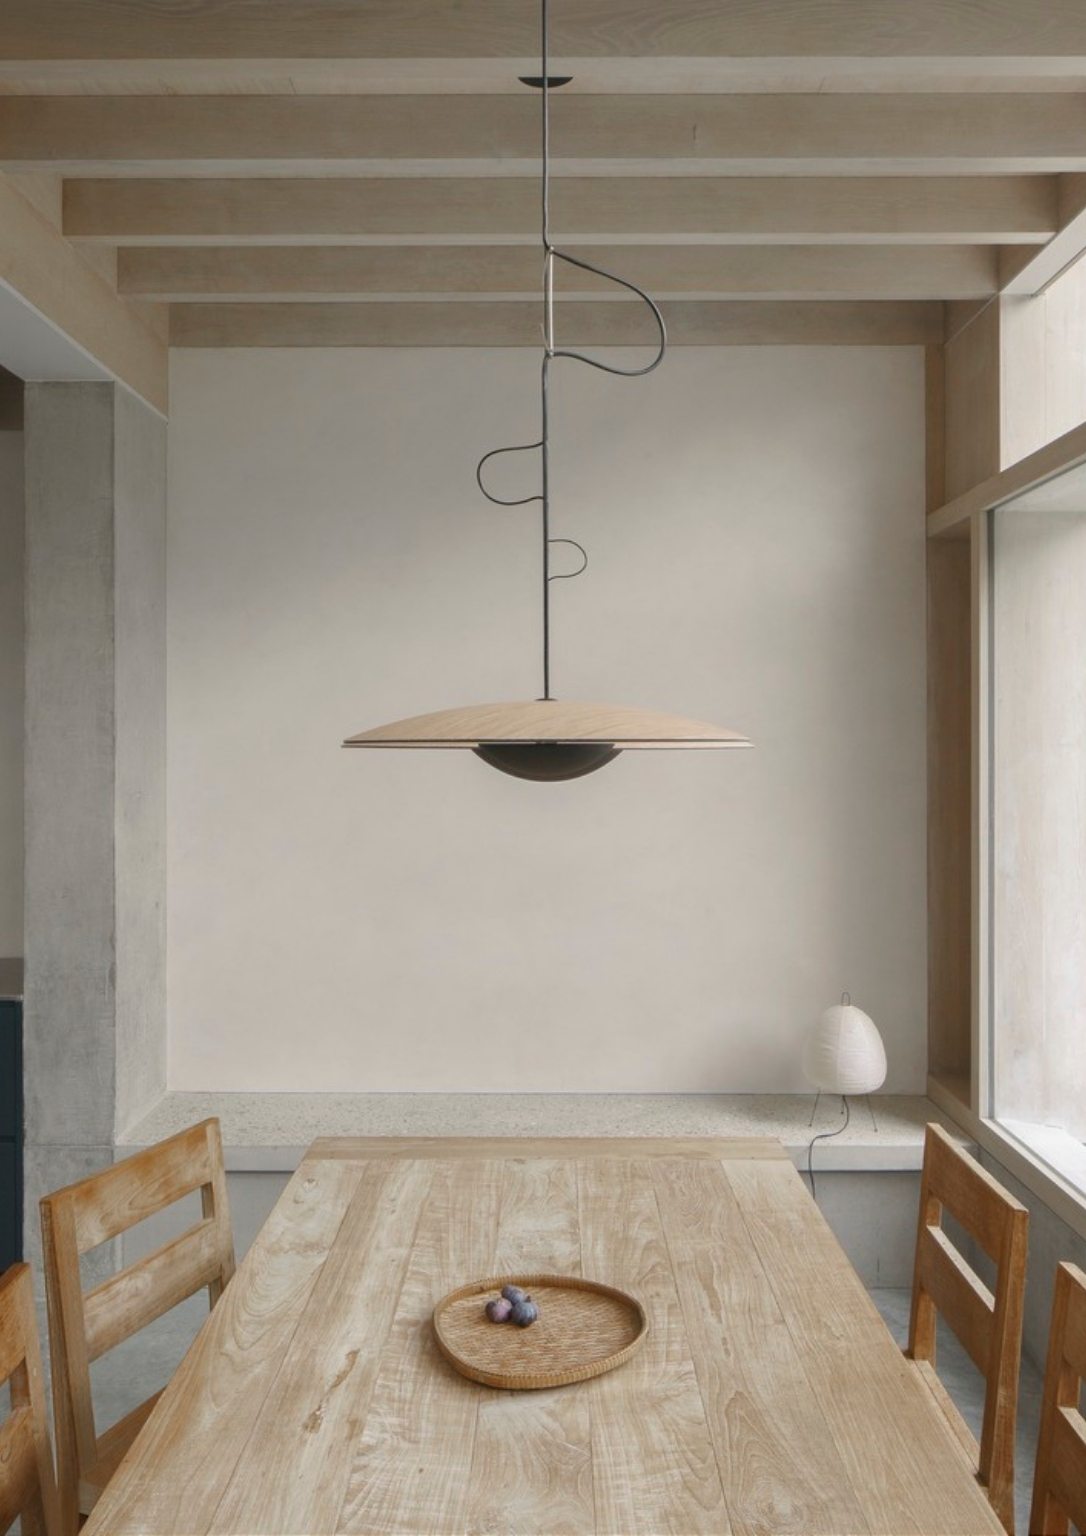 view of dining area with modern pendant lighting